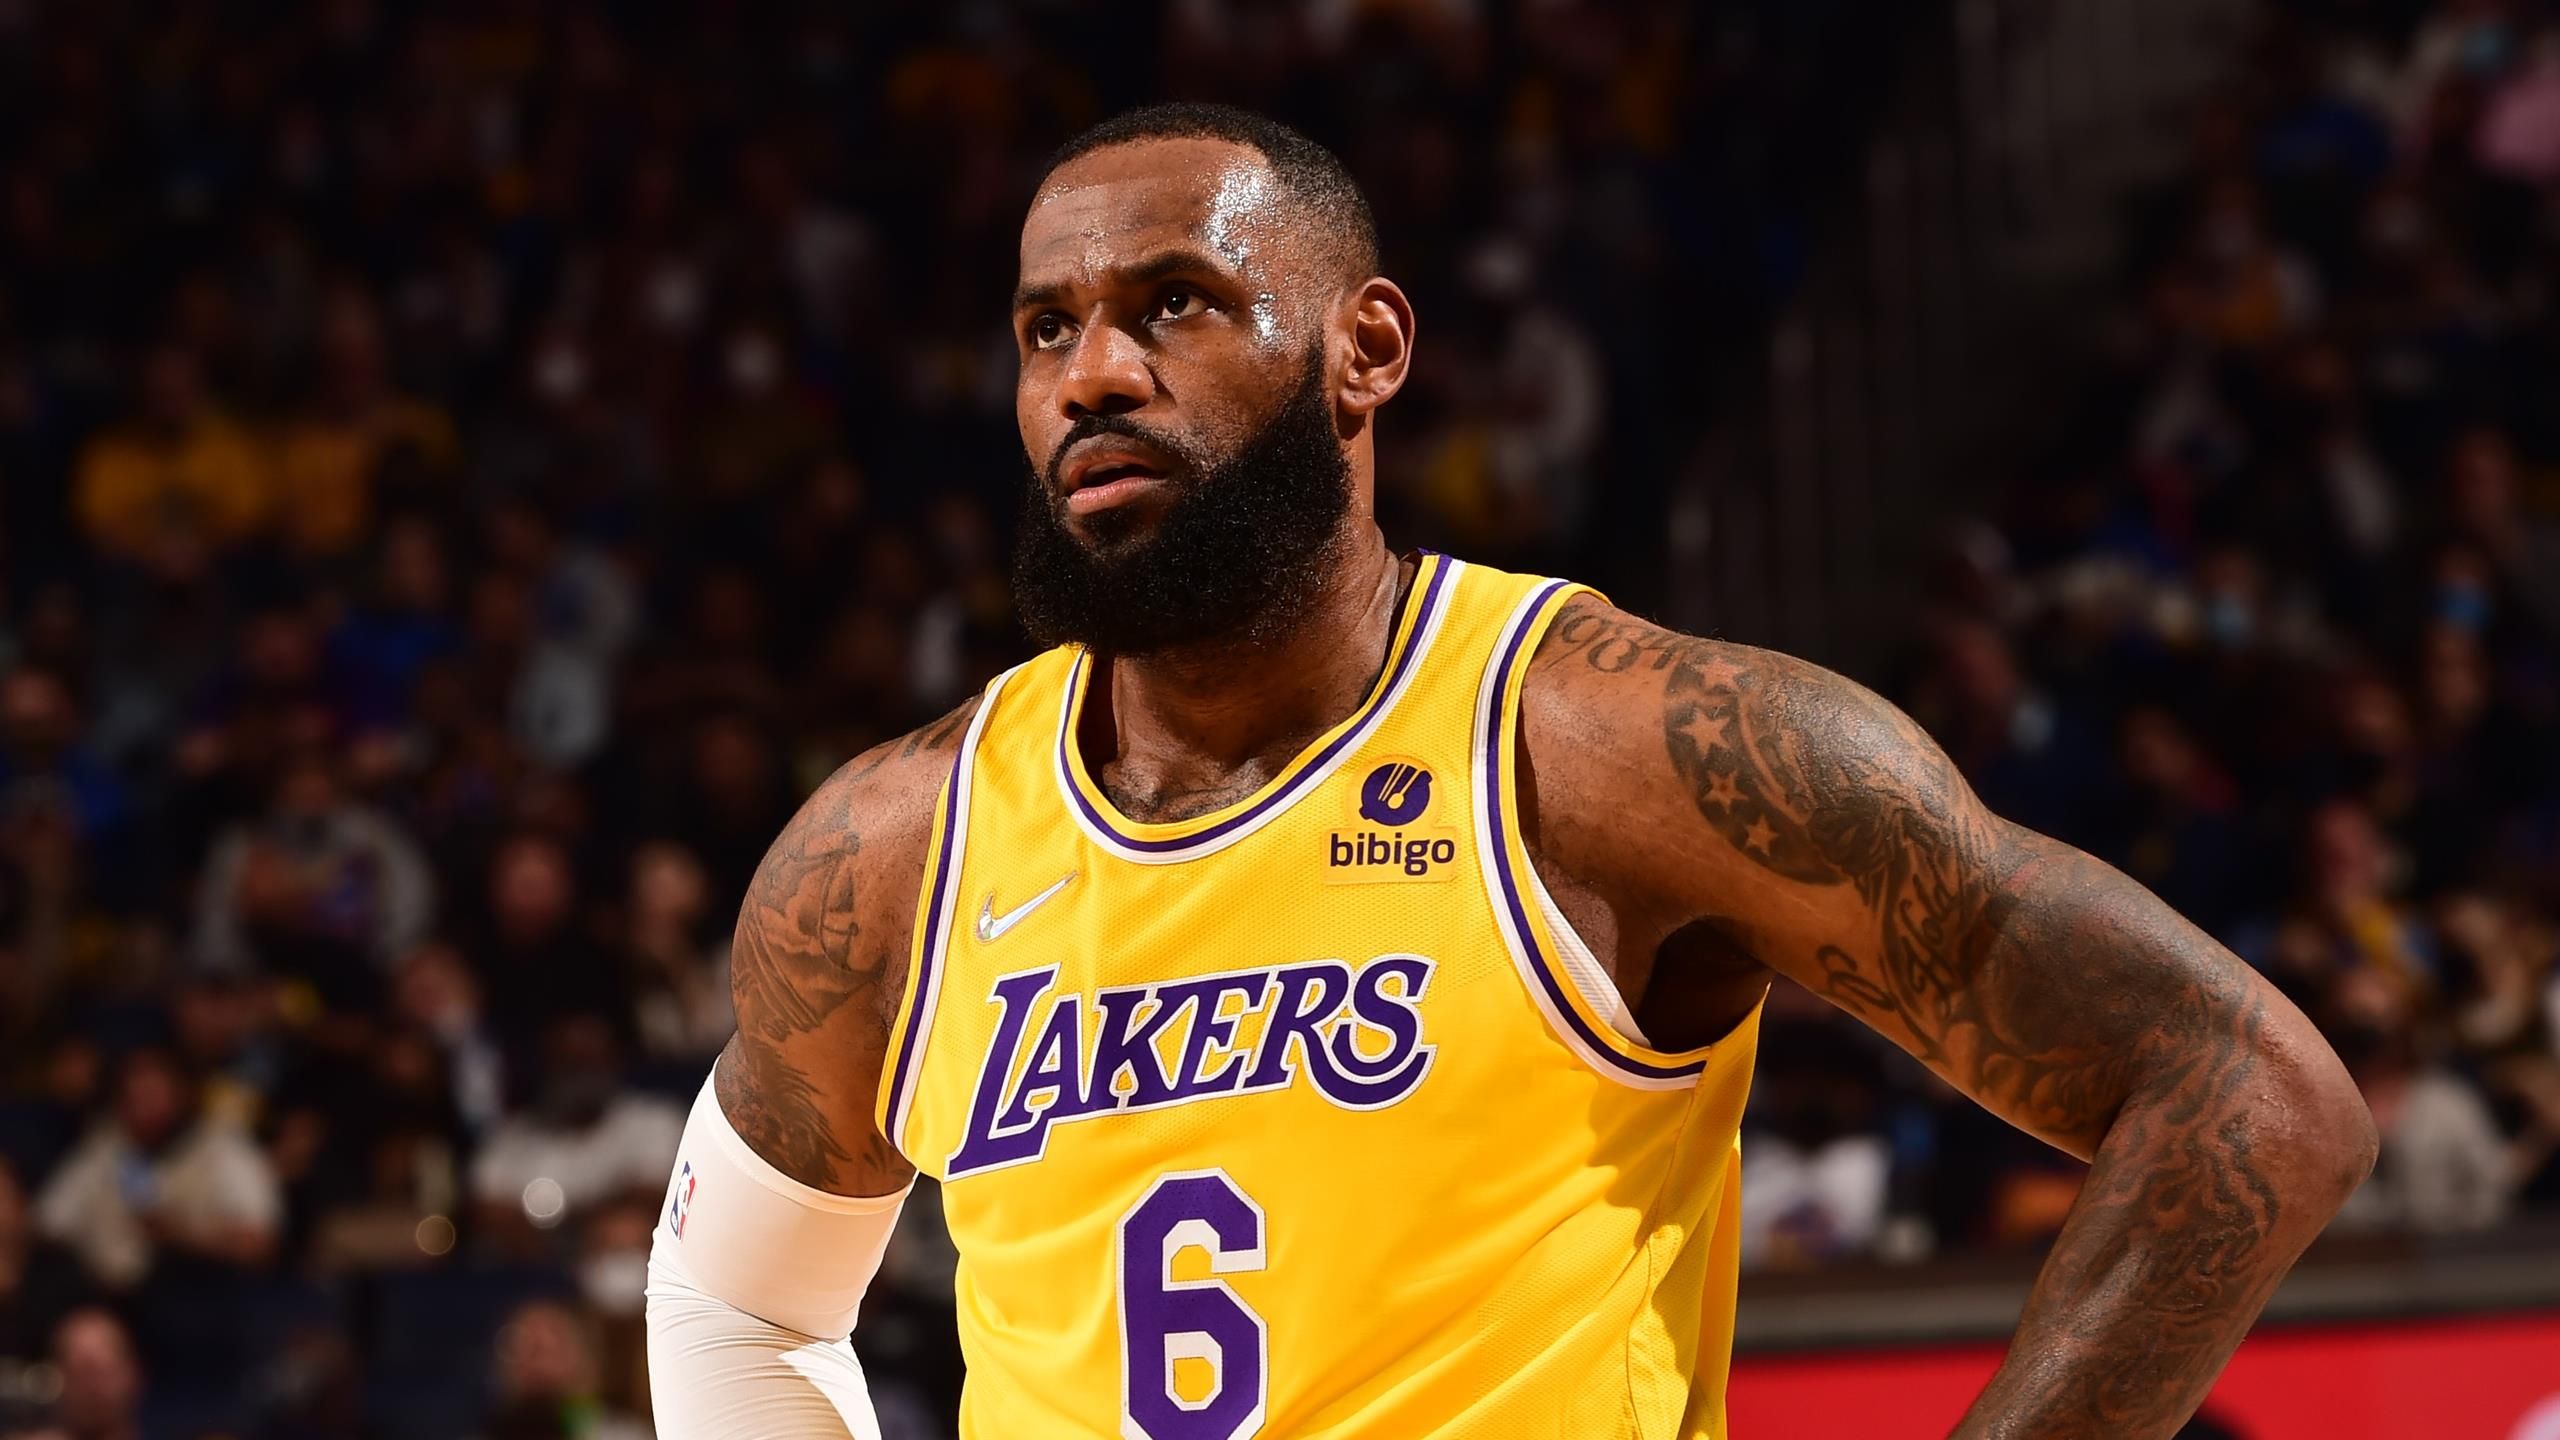 LeBron James scores 26 points to break all-time NBA scoring record in LA Lakers defeat to Golden State Warriors